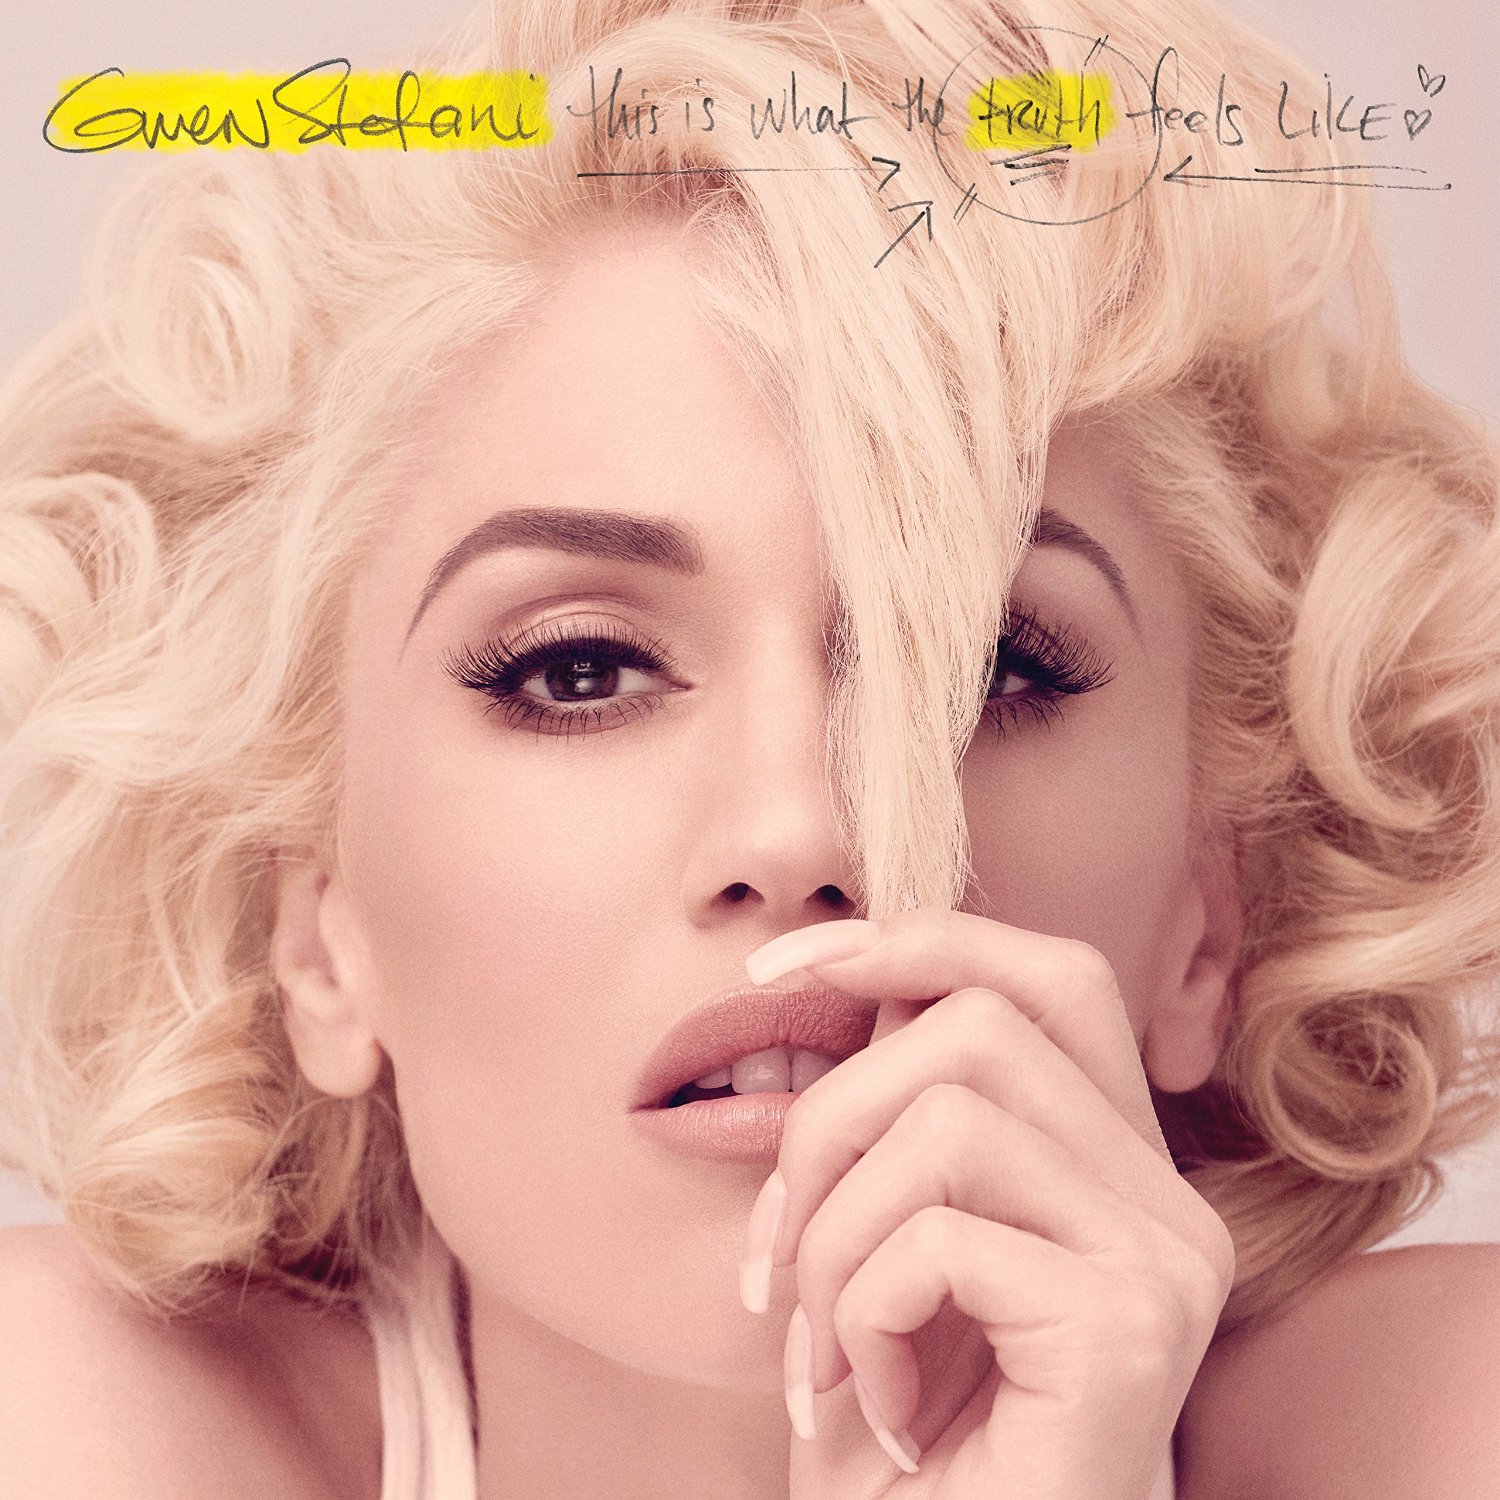 Gwen Stefani - This Is What the Truth Feels Like {Deluxe} (2016) [7Digital FLAC 24bit/44,1kHz]